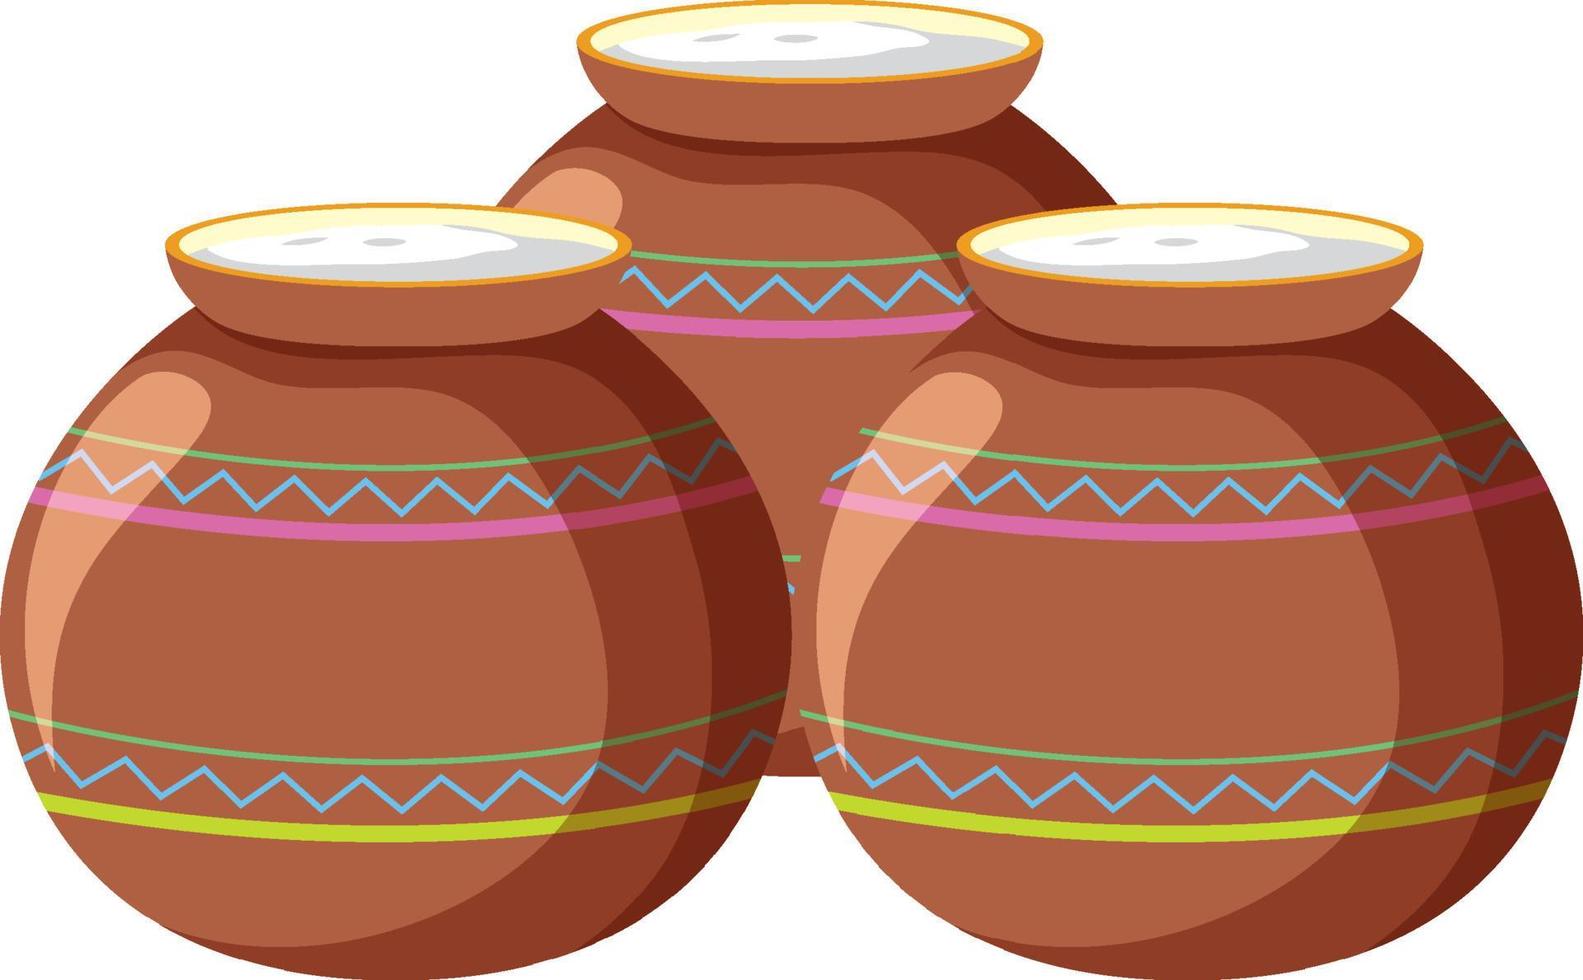 Three claypots with colorful patterns vector